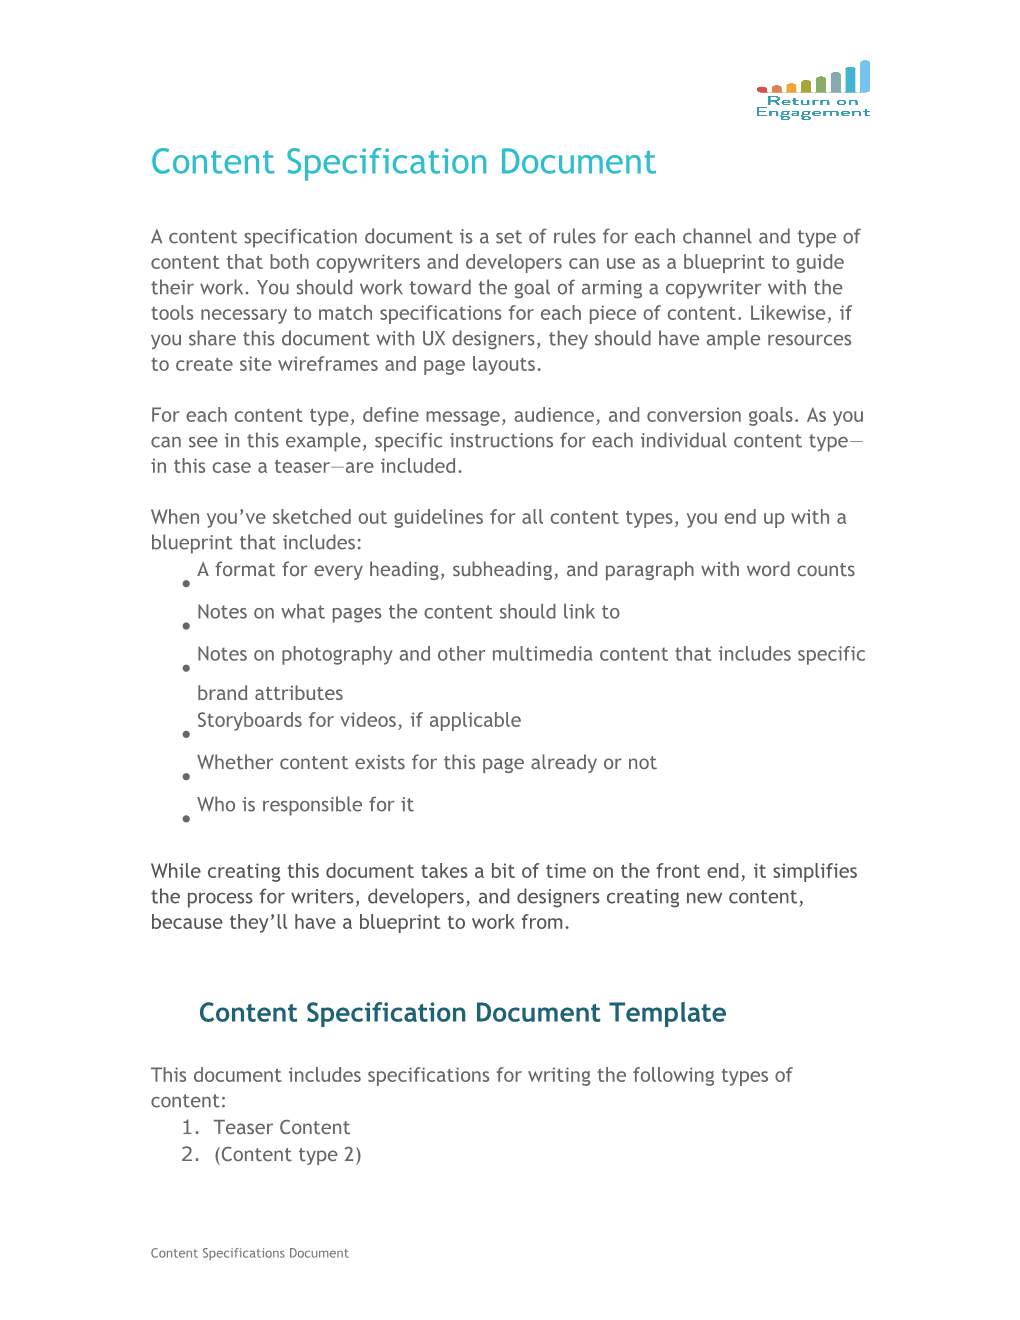 Content Specification Document